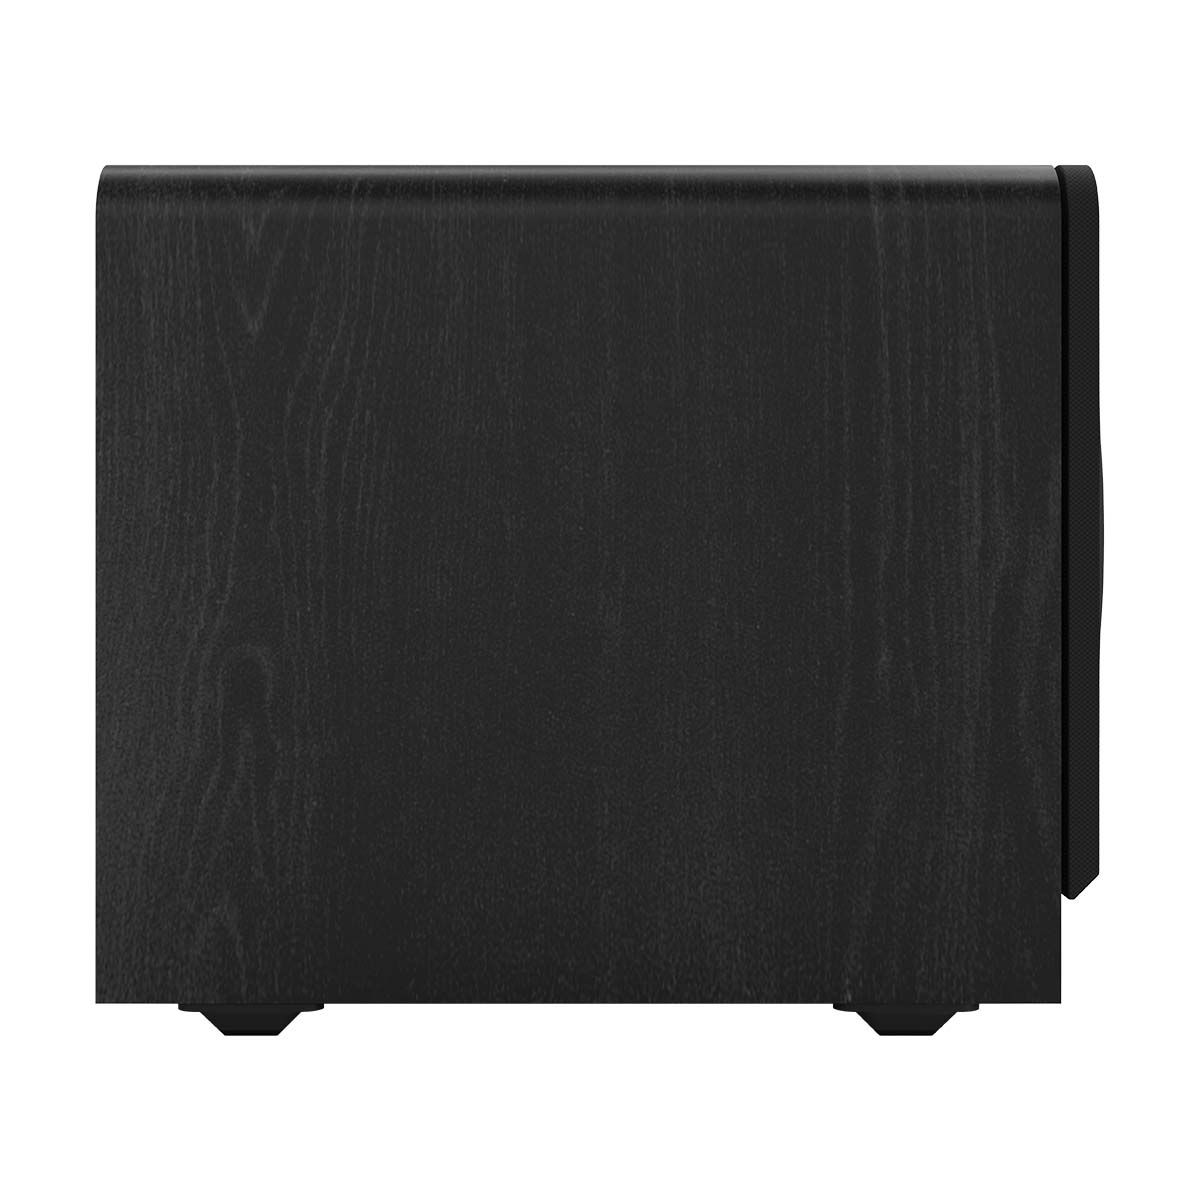 Klipsch RP-1400SW 14" Powered Subwoofer - Ebony - side view with grille